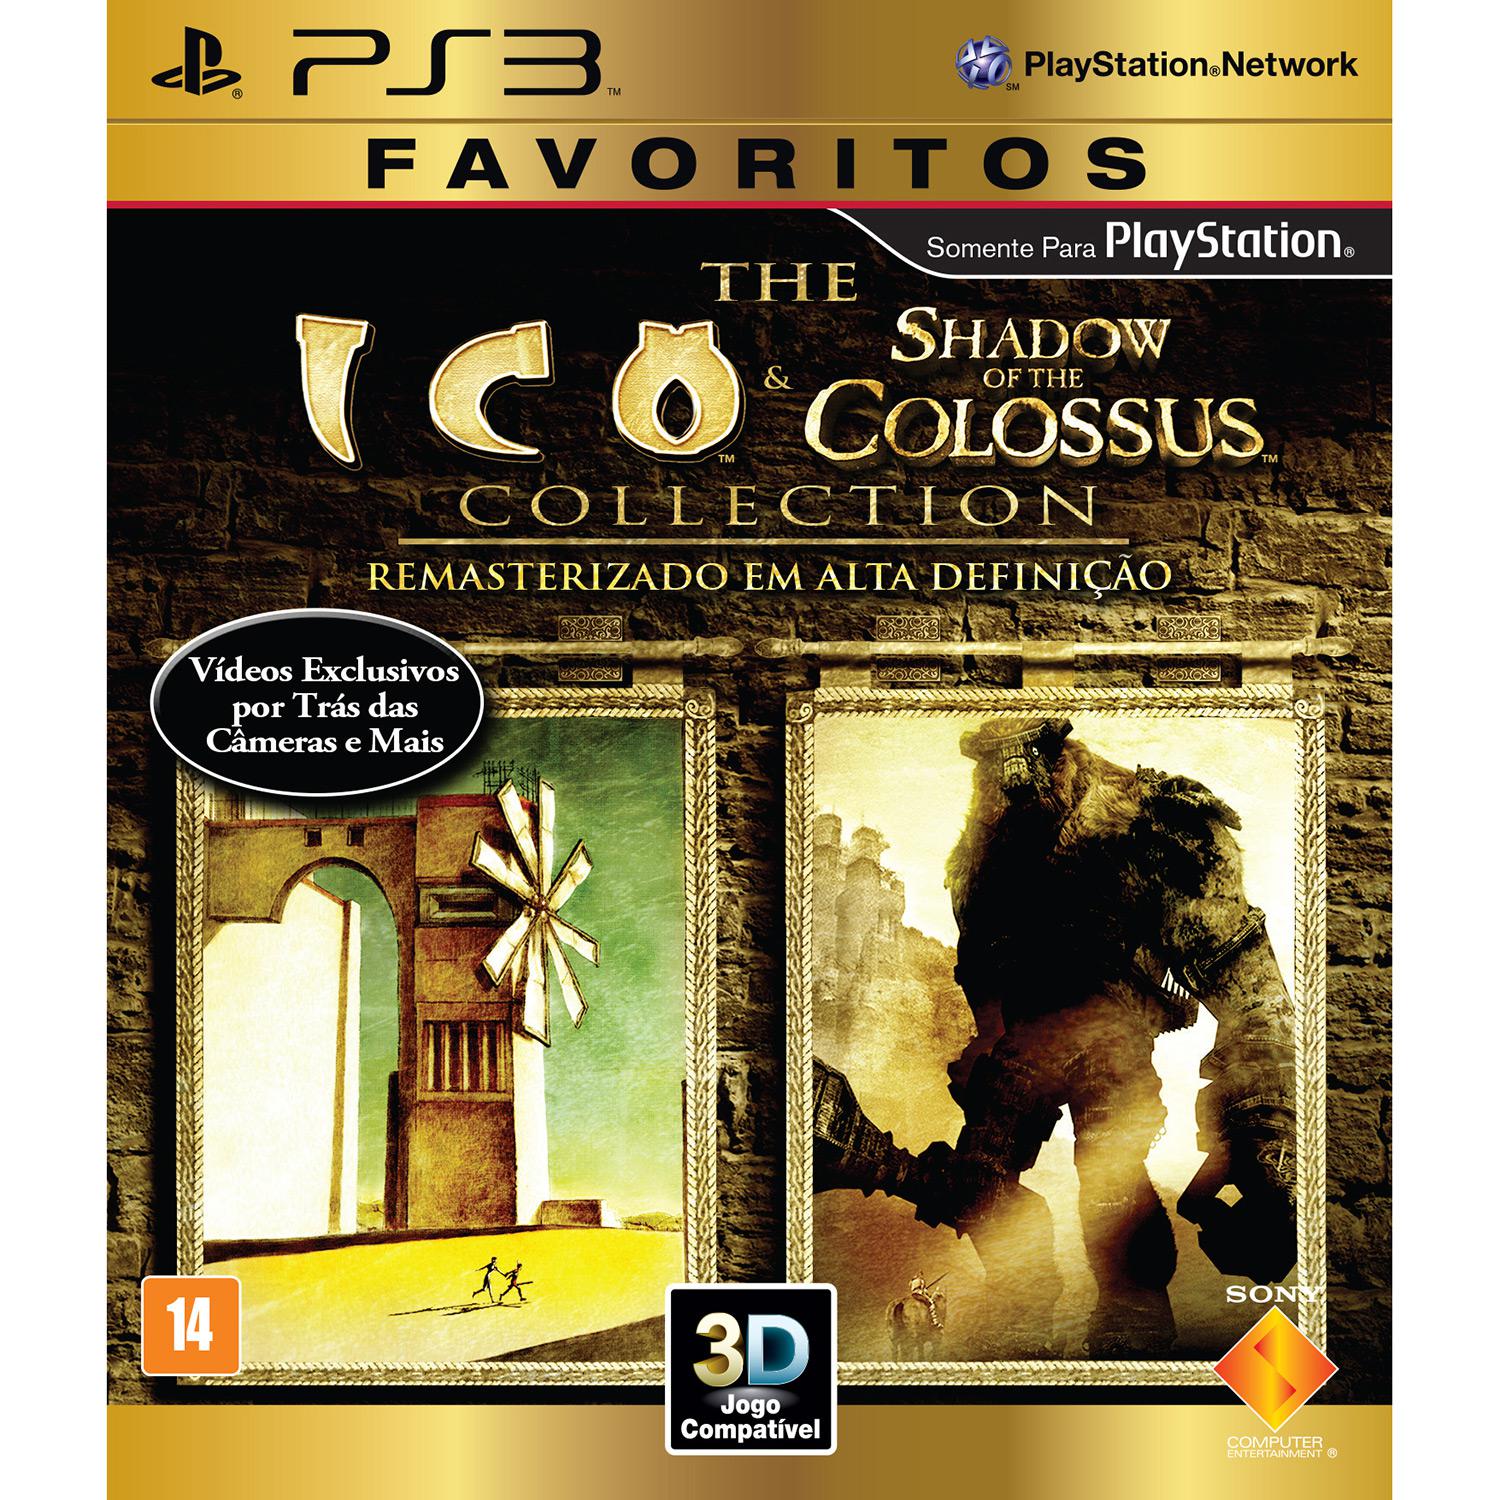 Game Ico/Shadow Of The Colossus Collection - Favoritos - PS3 é bom? Vale a pena?